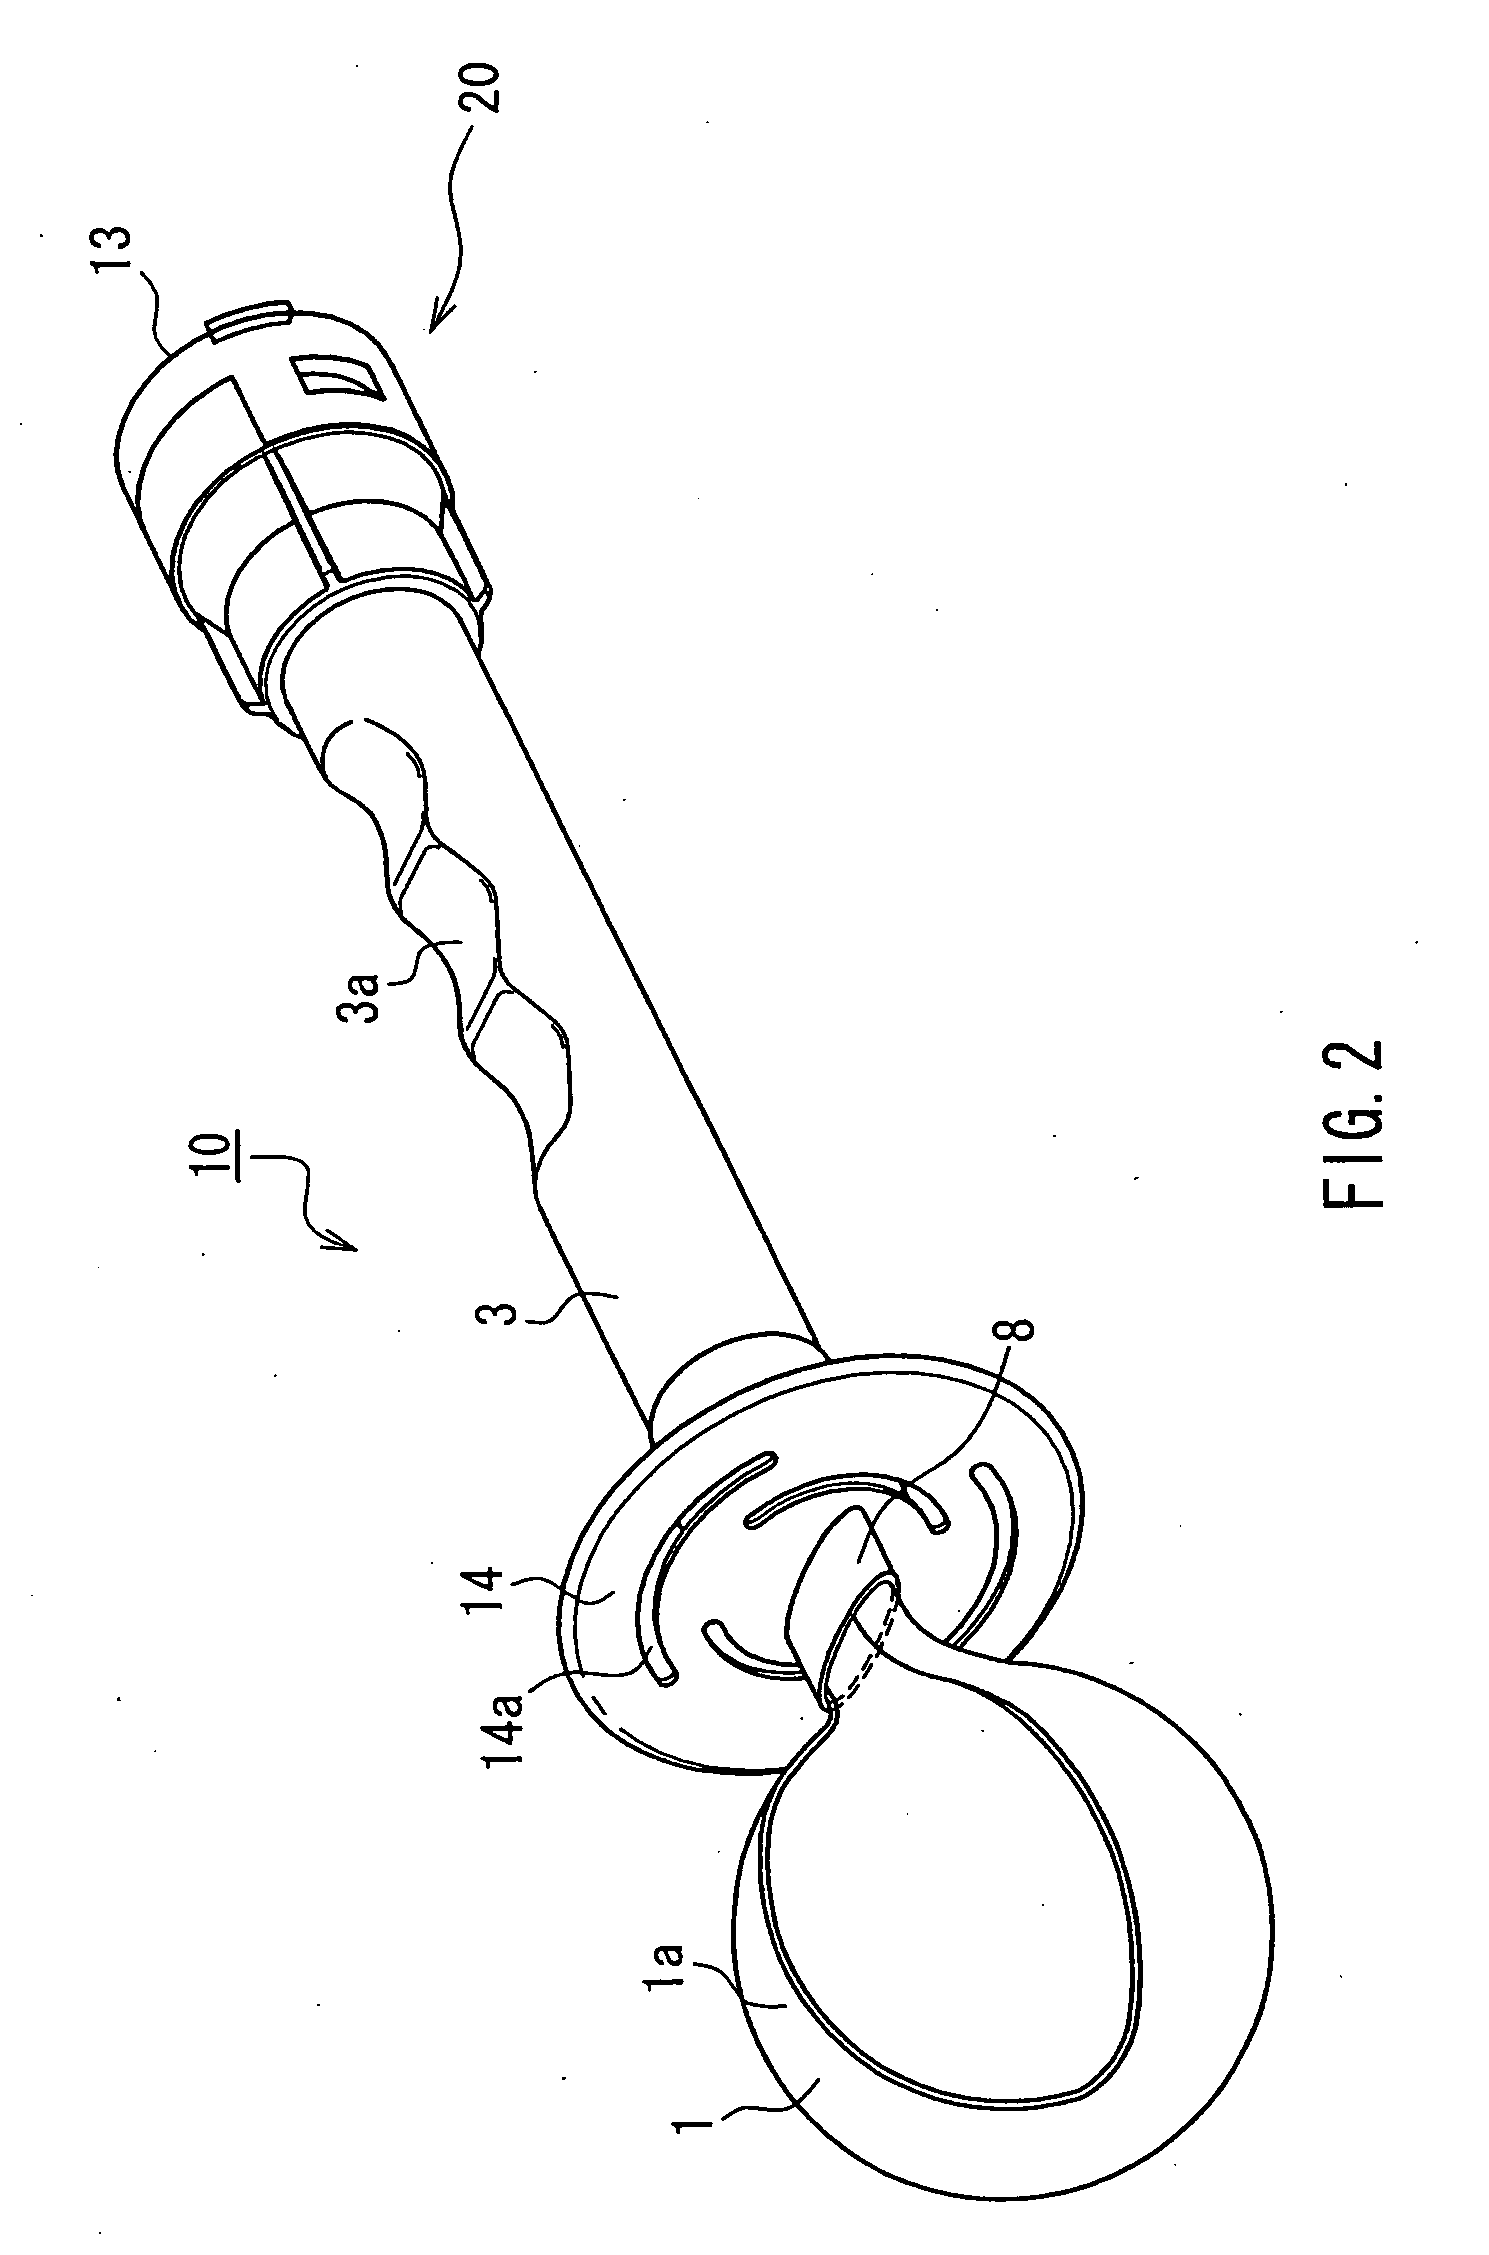 Probe for measuring oral pressure, device for measuring oral pressure using the same, and training tool for restoring oral function